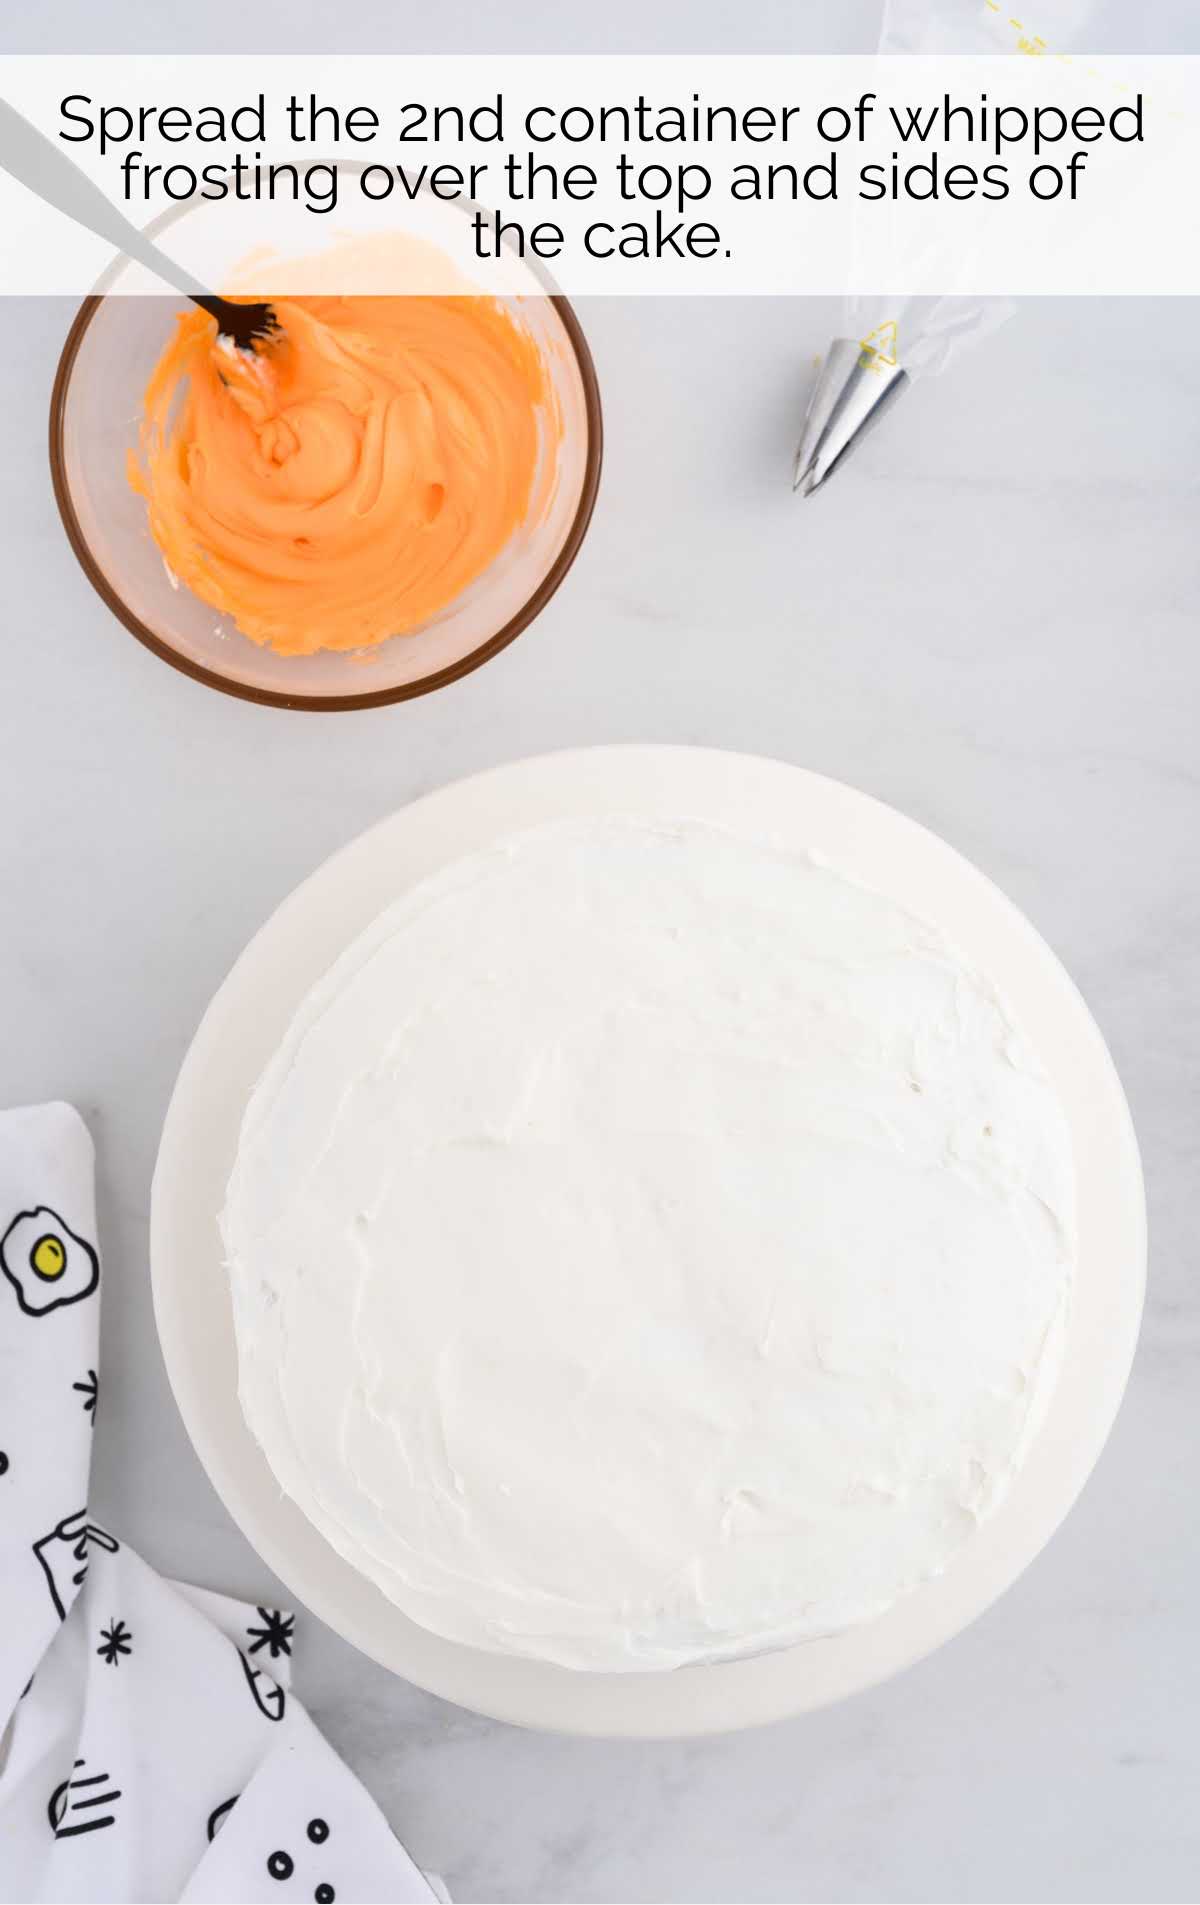 whipped cream frosting spread over the cake